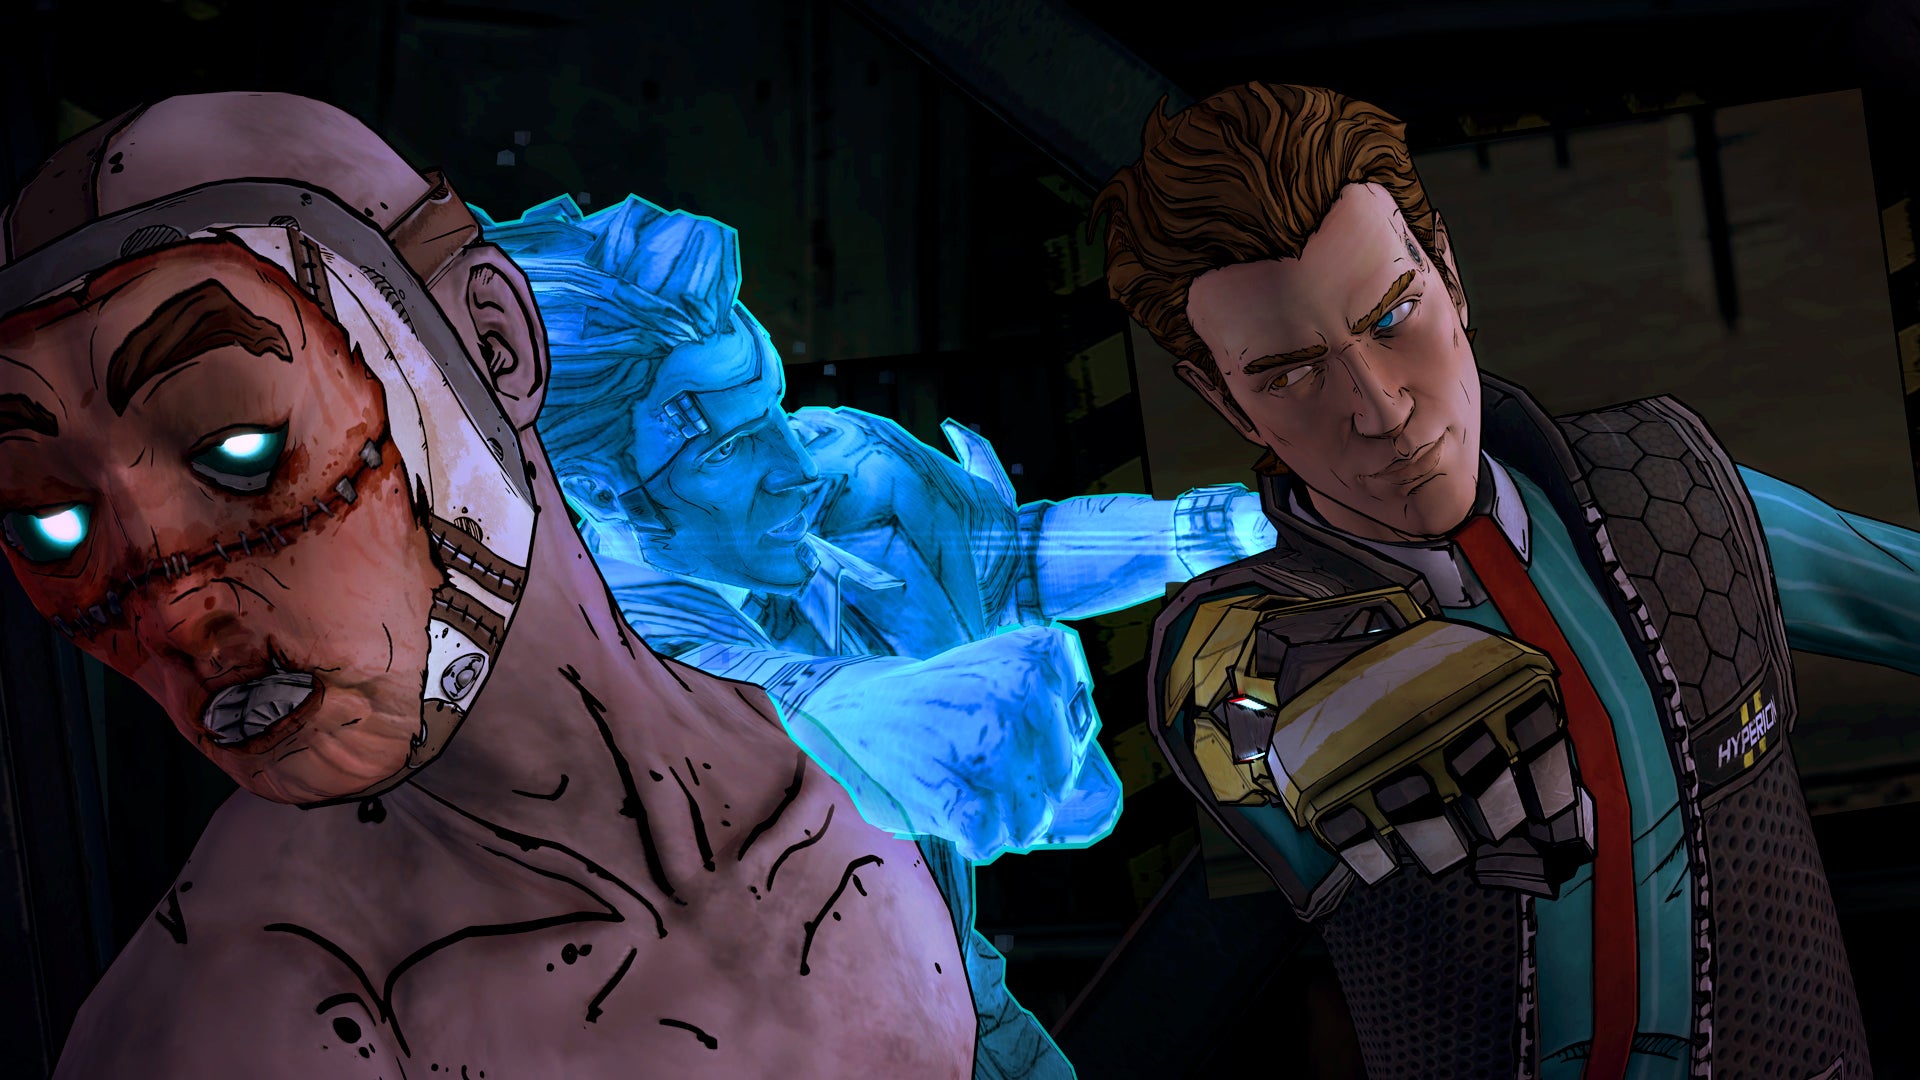 Image for Telltale games will all be removed from GOG, but 2K is working to bring back Tales from the Borderlands